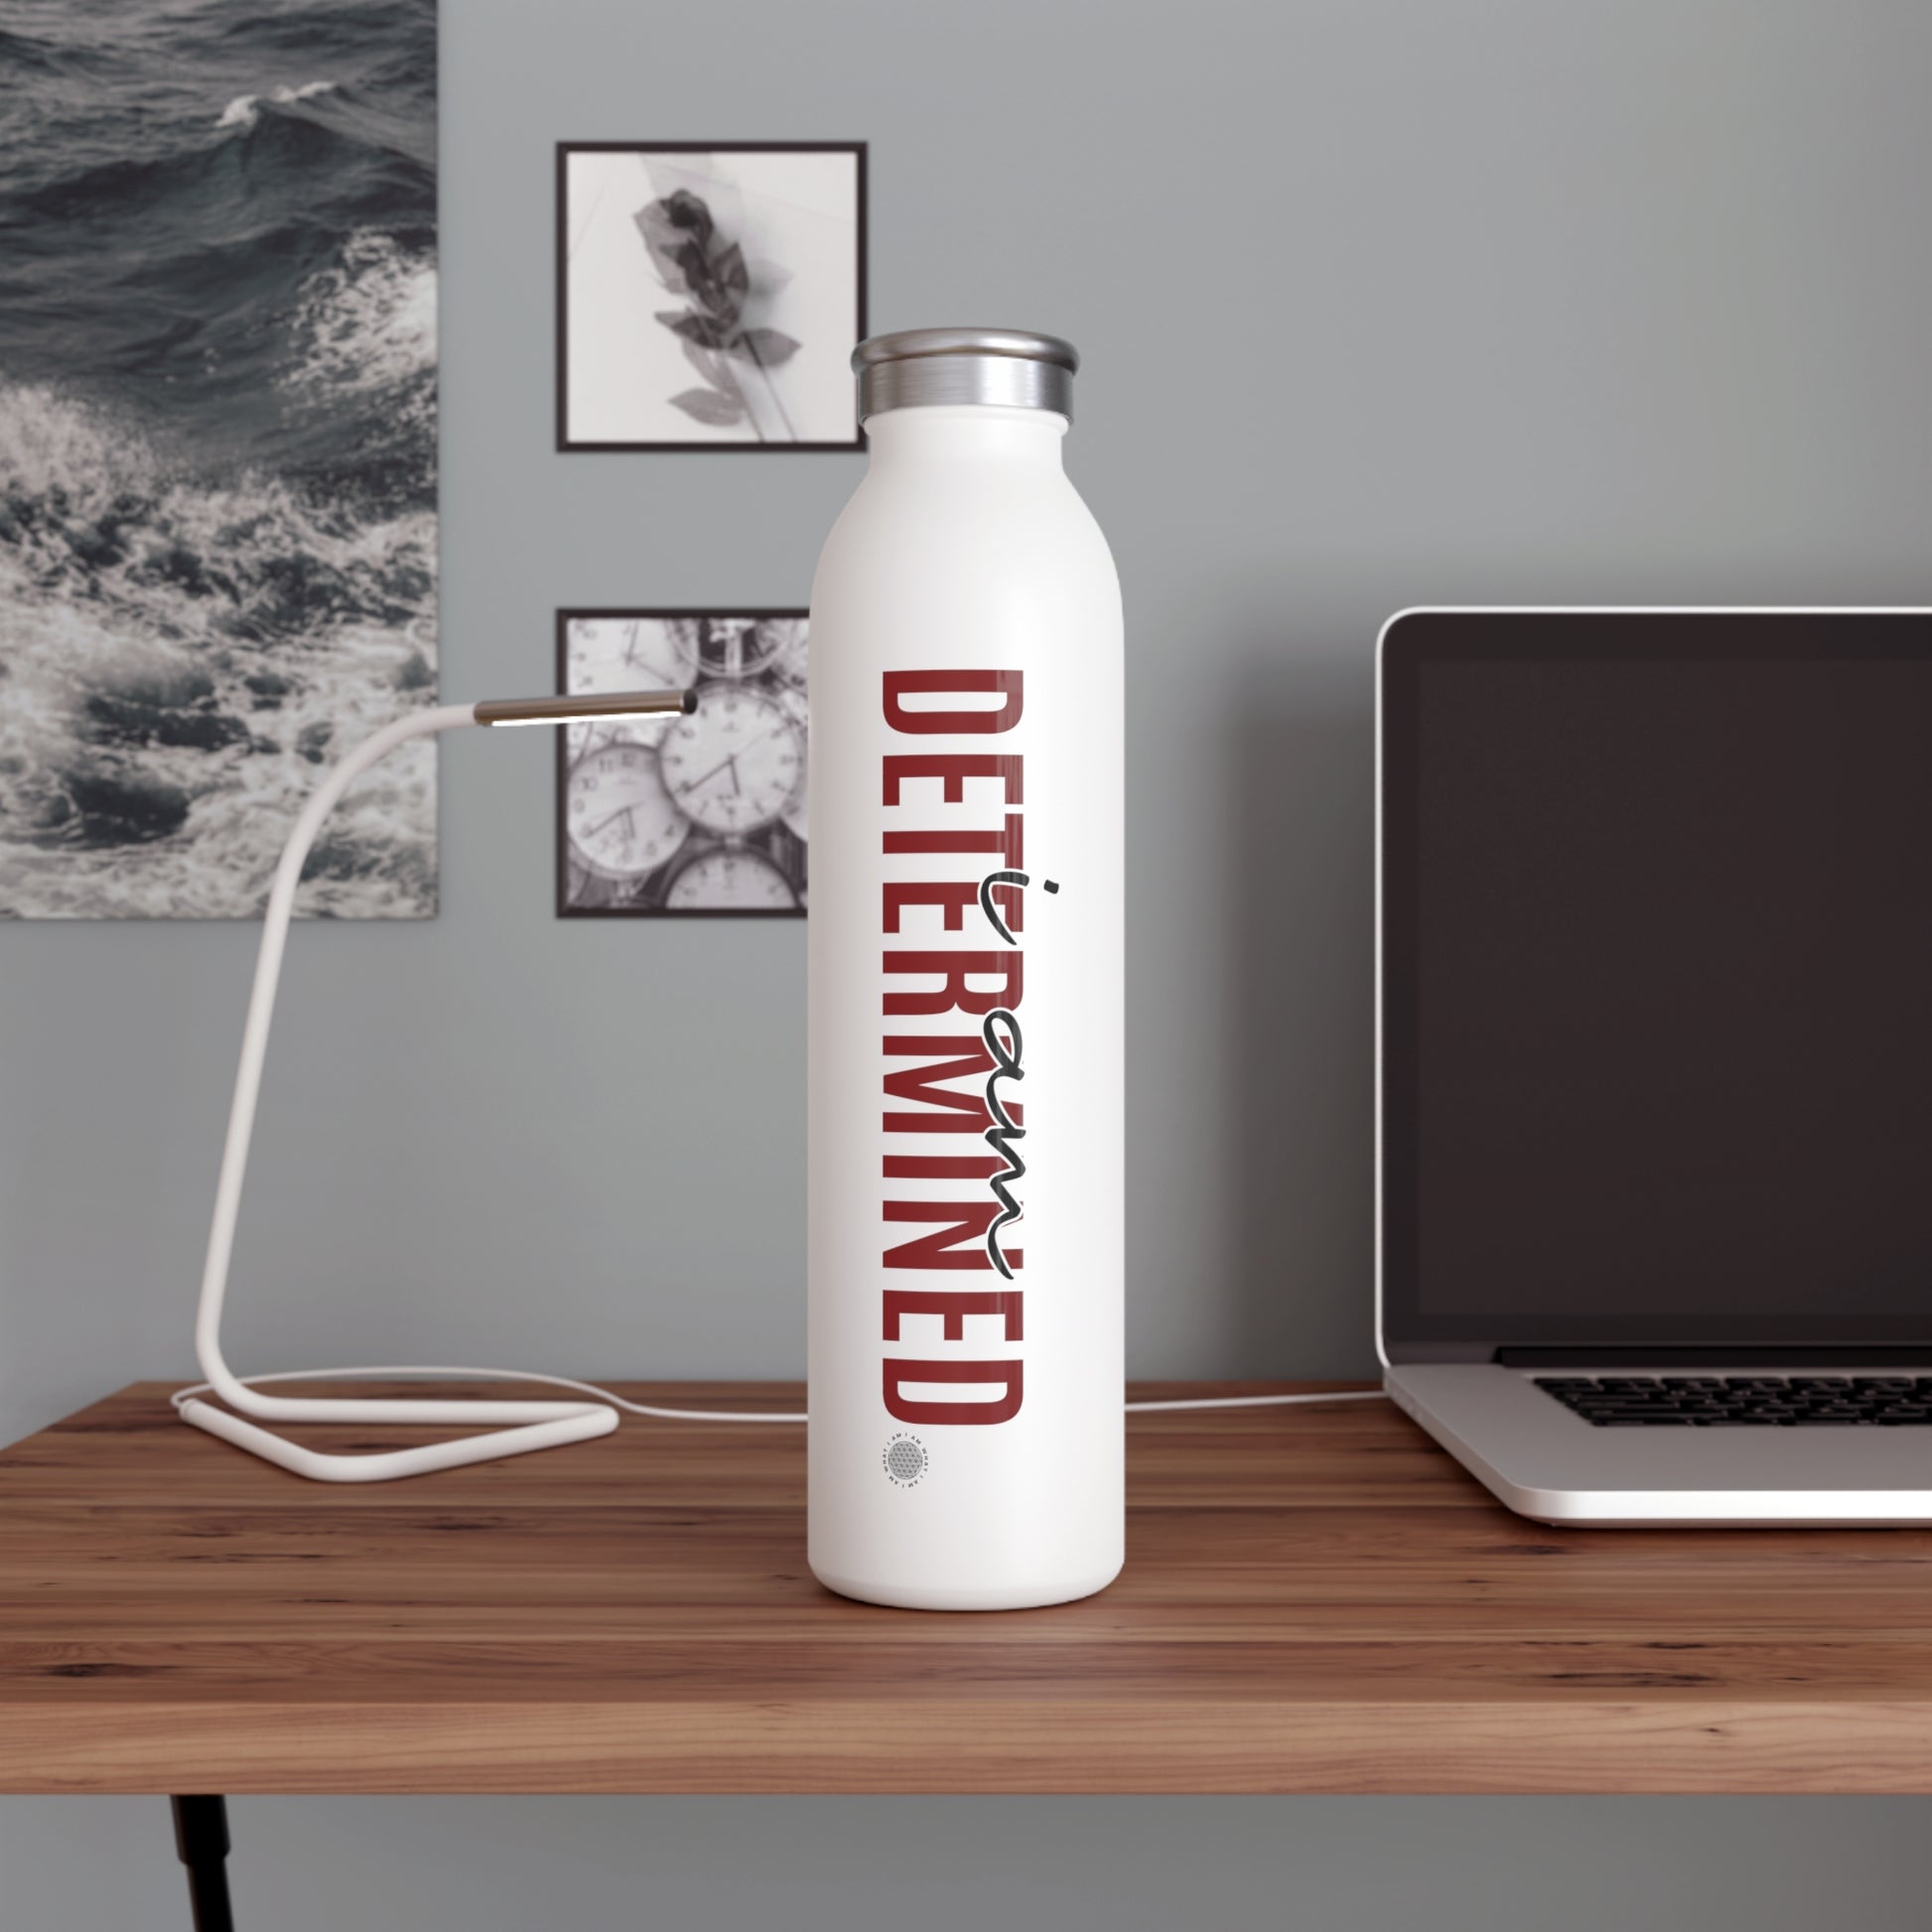 Our I Am Determined affirmation water bottle is one of our positive affirmations for mental health. Positive thinking keeps our mindset happy and healthy. This personalized water bottle was designed to become a creator’s favorite canvas of expression.